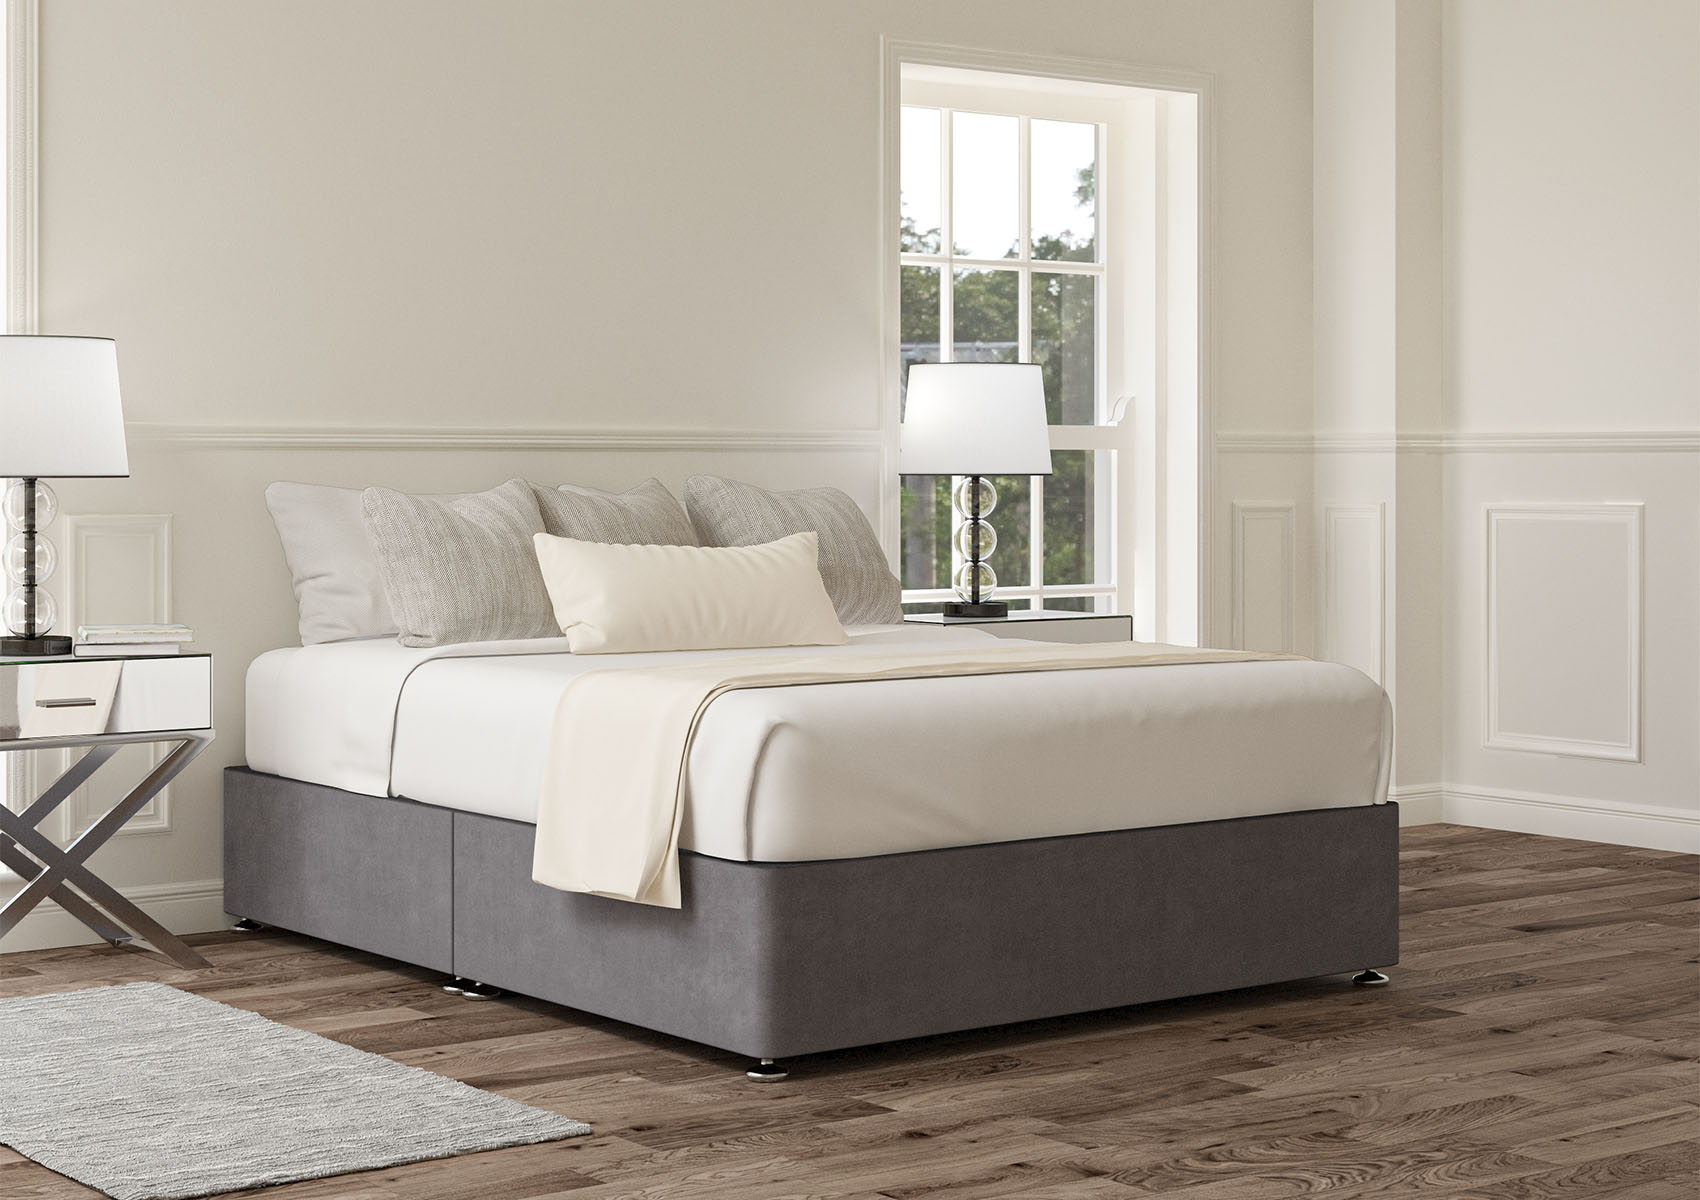 View Upholstered Carina Parchment Upholstered Single Divan Bed Time4Sleep information